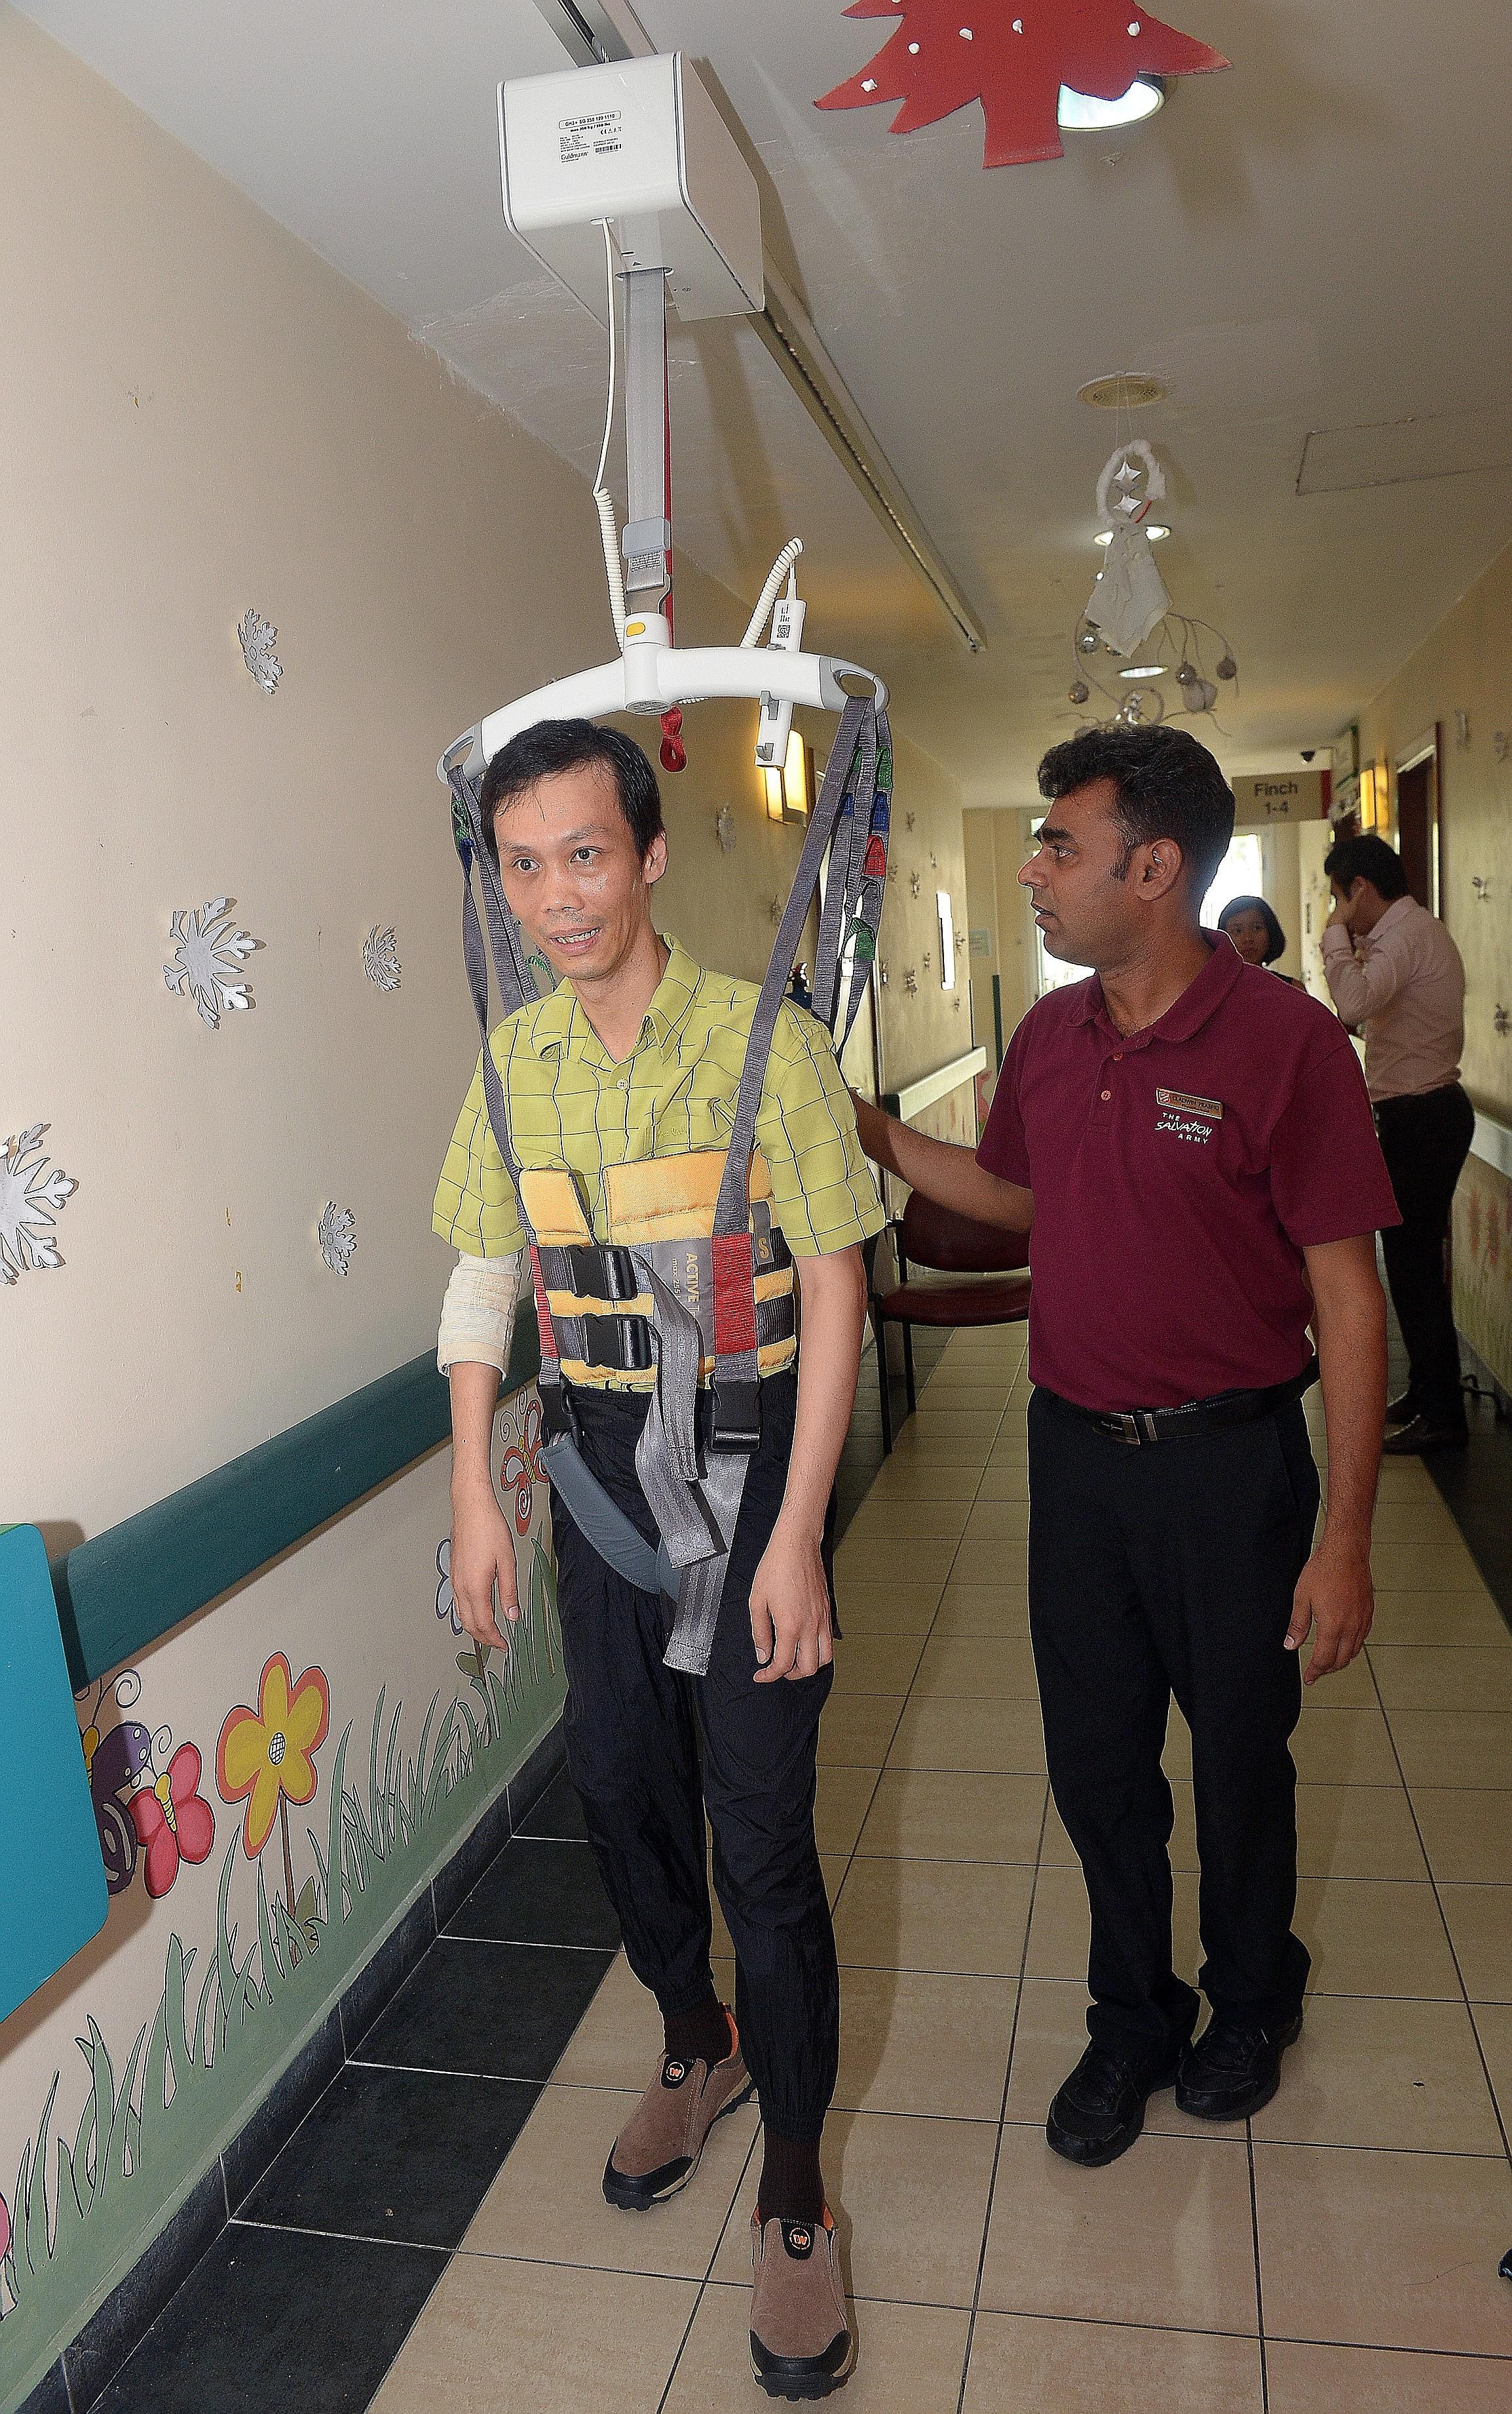 Senior physiotherapist Gladwin Prabhu, 39, helping along client Chang Phan Yong, 41, who is strapped into a newly installed ceiling hoist at The Salvation Army's Peacehaven Nursing Home, yesterday. Funds for the $10,000 hoist were donated by Nippon P